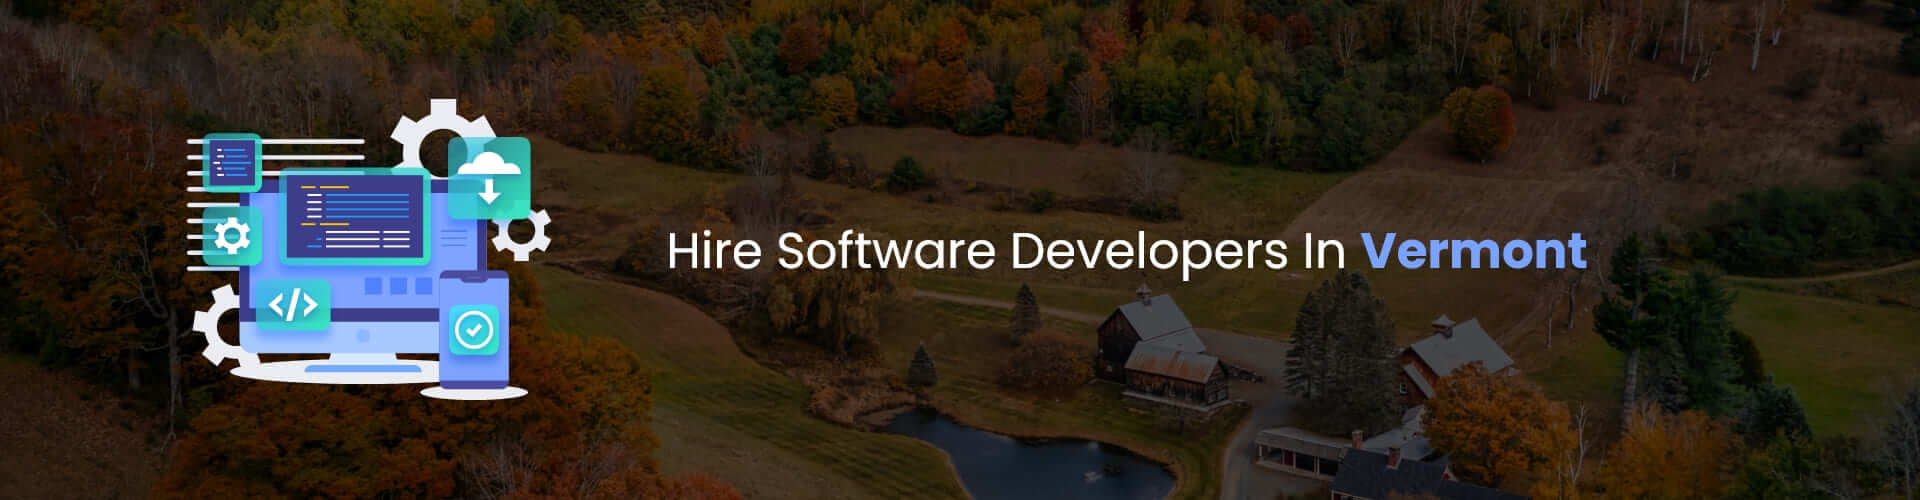 software developers in vermont